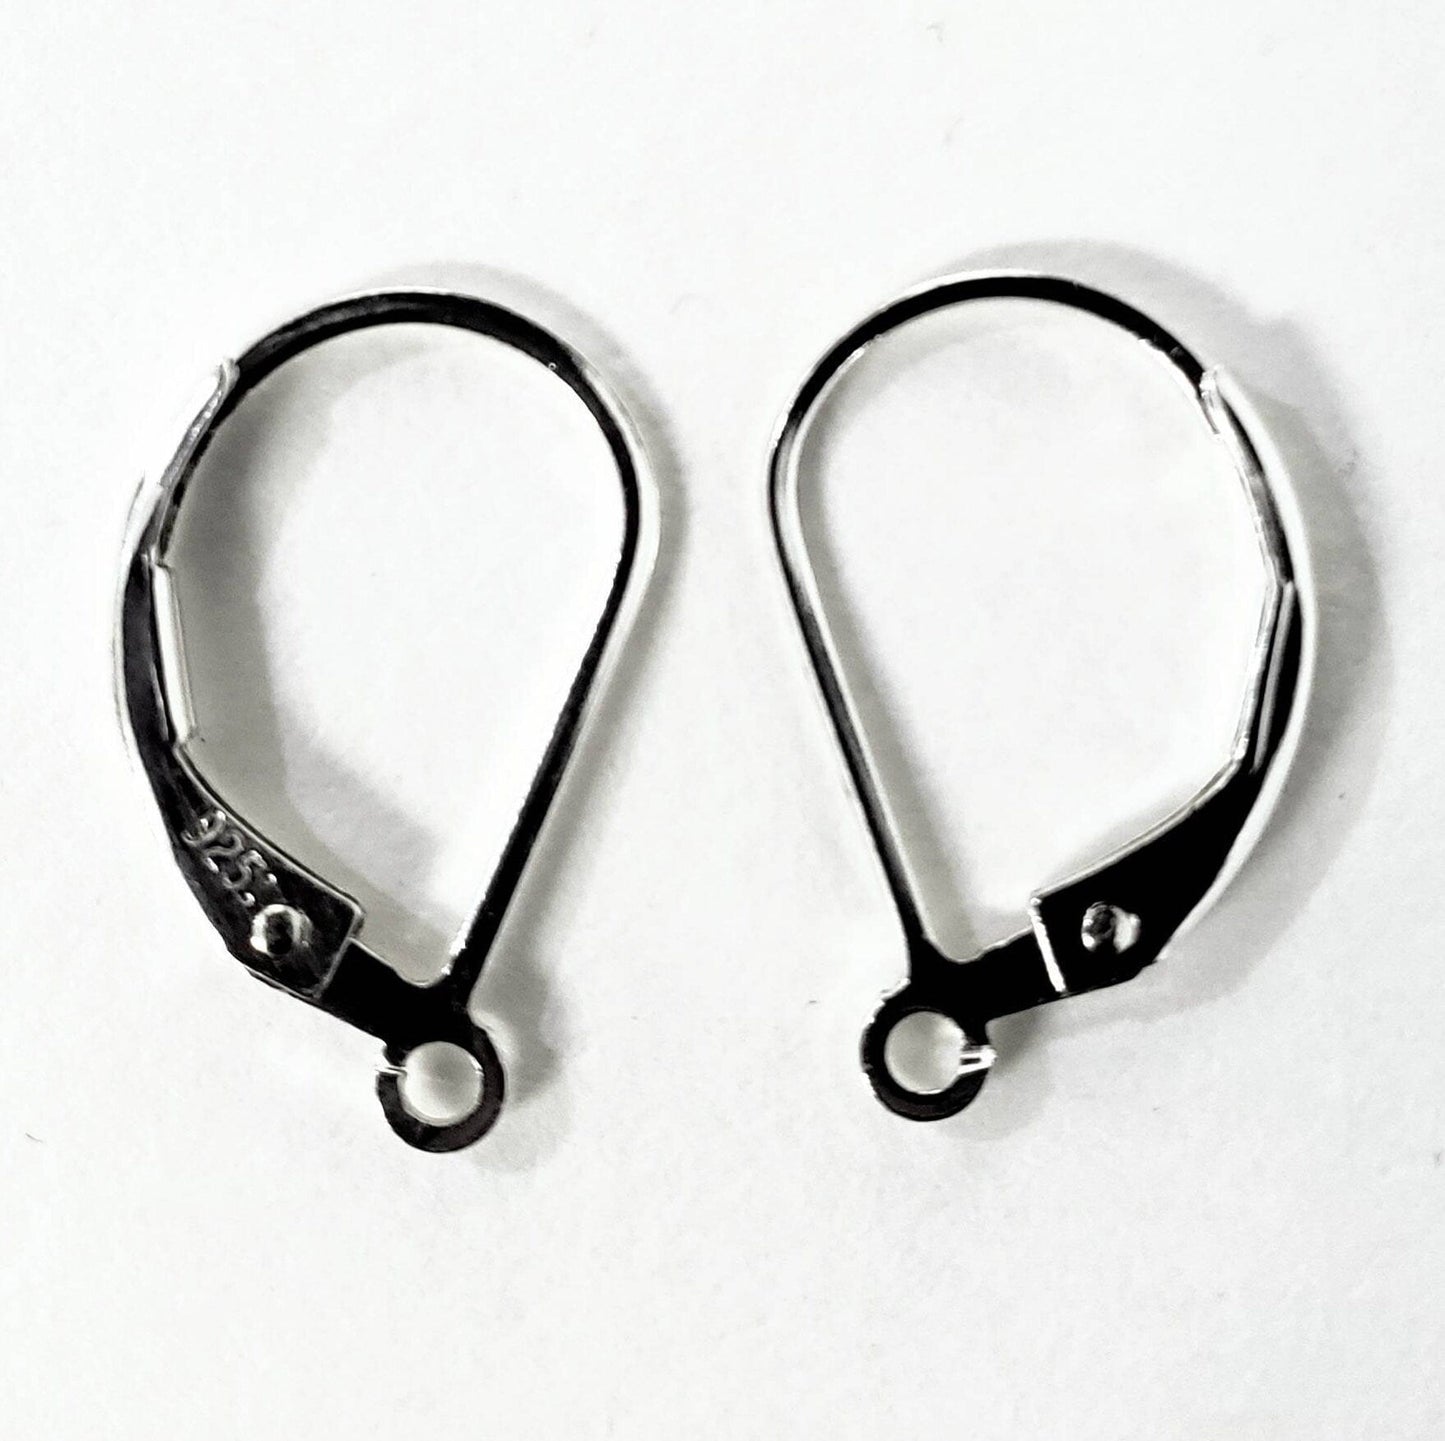 925 sterling silver lever back earwire, high quality, earrings making findings, 925 stamped, 1 pair or bulk wholesale